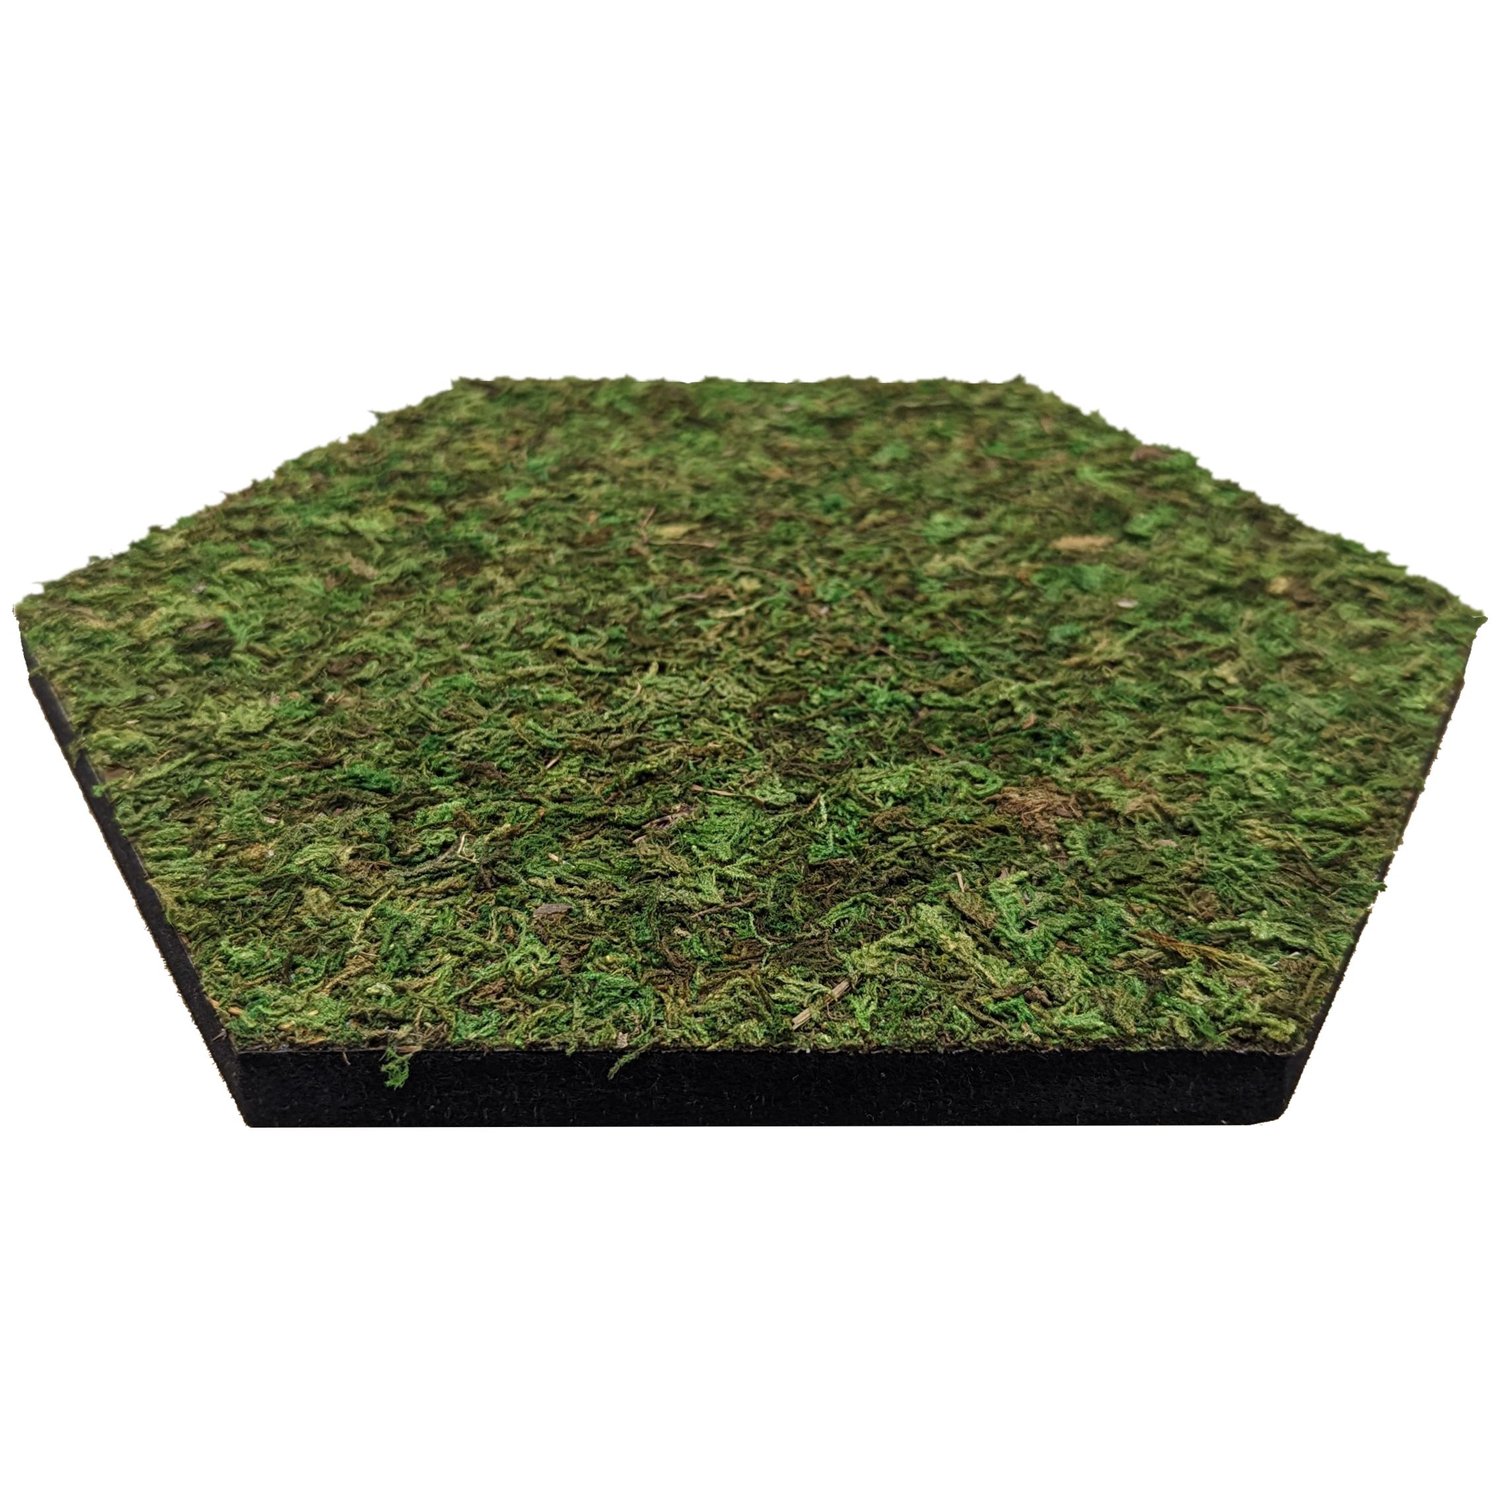 Simply Soundless - Room Sound Dampening - Natural Moss Premium - Simply  Soundless Moss Curated Pack - 10 Mixed Moss Sound Absorbing Tiles - 7 Flat  Moss 3 Artscaped Moss